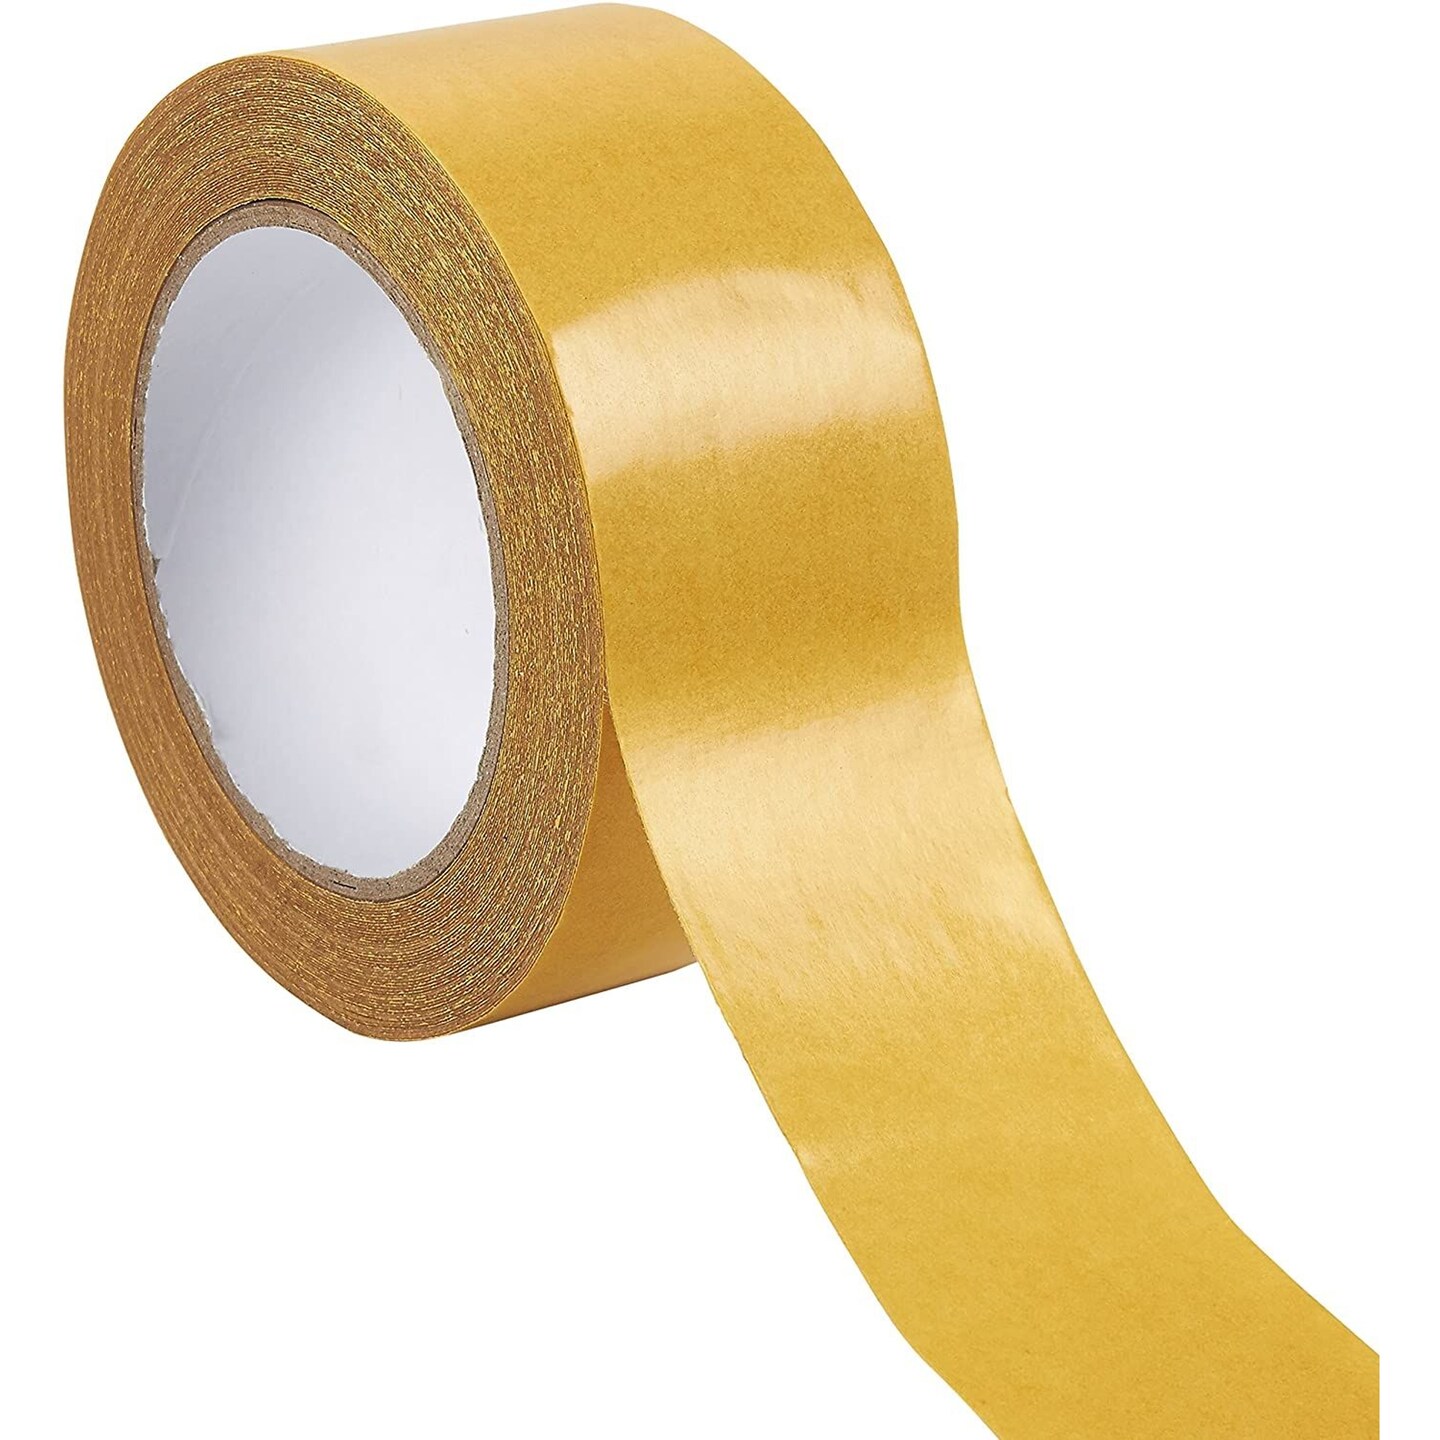 Heavy Duty Double Sided Tape for Carpet, Area Rugs, Self Adhesive for  Hardwood, Tile, Indoor, and Outdoor Floors, 49 Feet